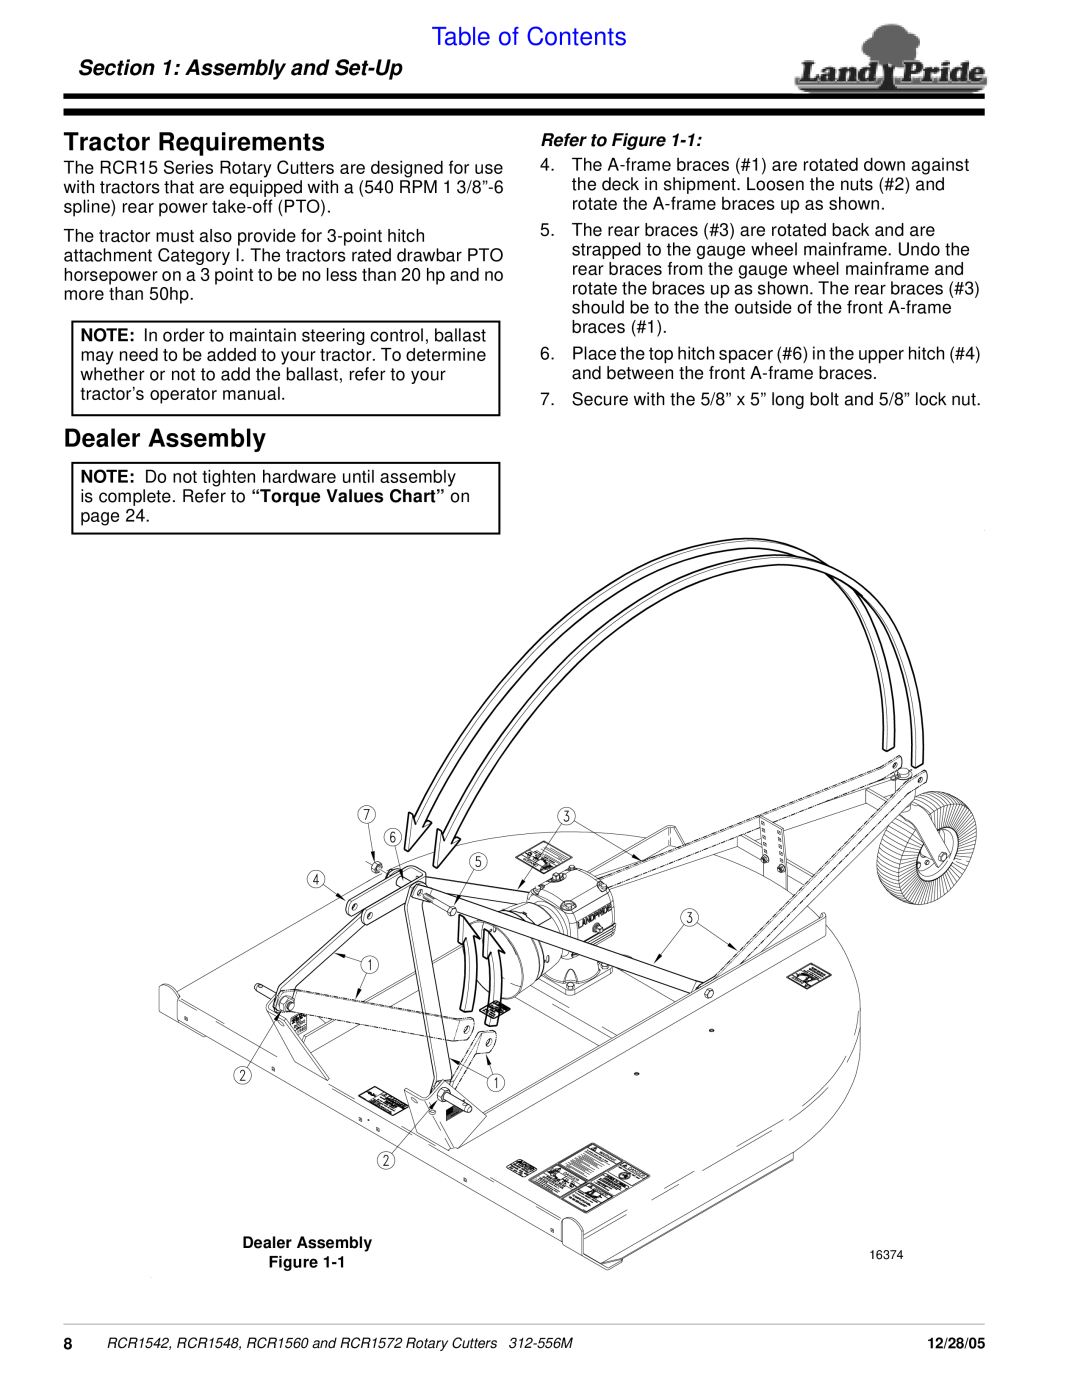 Land Pride RCR1542, RCR1560 Tractor Requirements, Dealer Assembly, Assembly and Set-Up, Refer to Figure, Table of Contents 